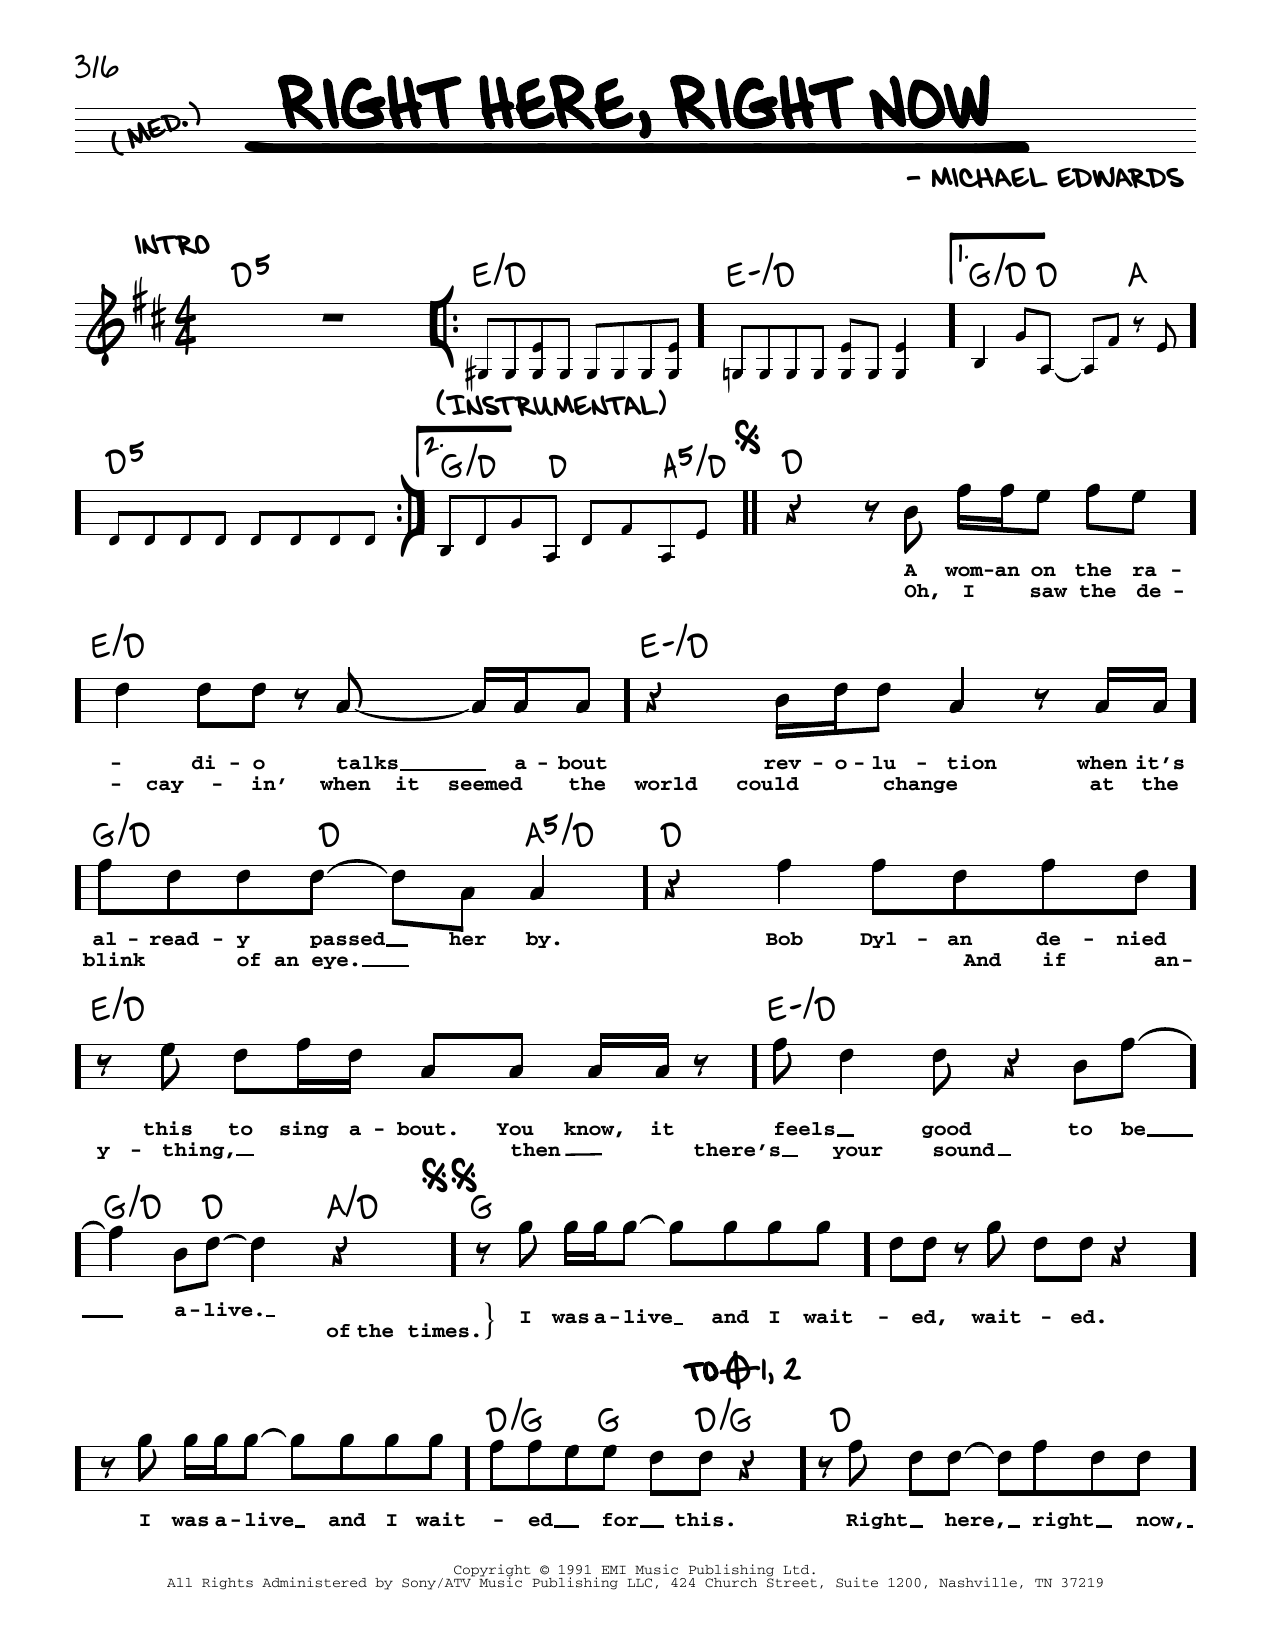 Download Jesus Jones Right Here, Right Now Sheet Music